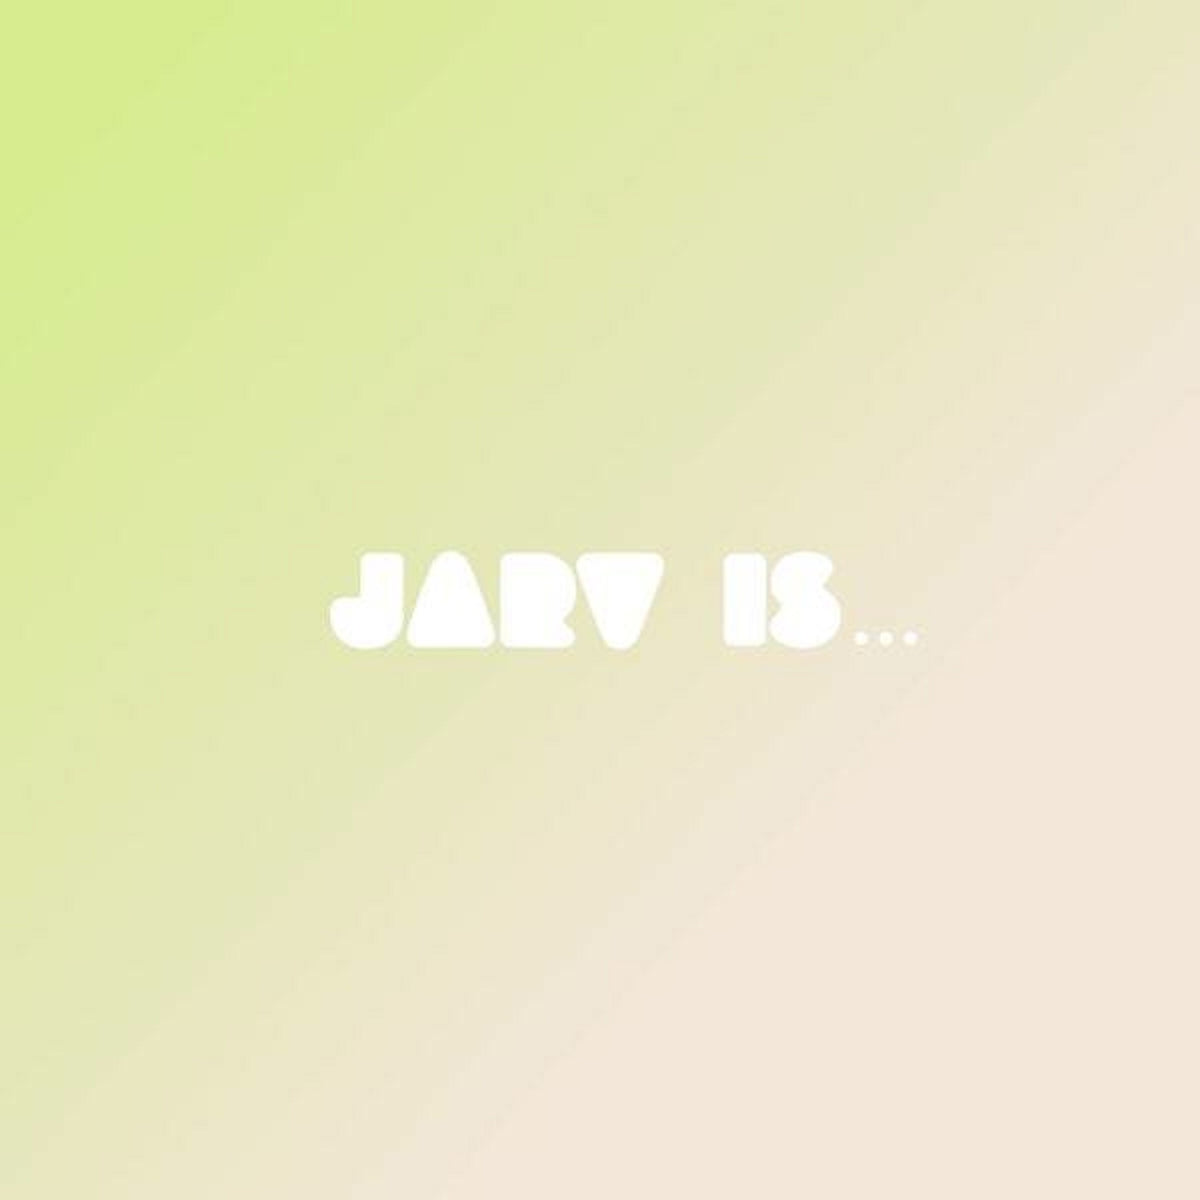 JARV IS... - Beyond The Pale - BROKEN 8 RECORDS